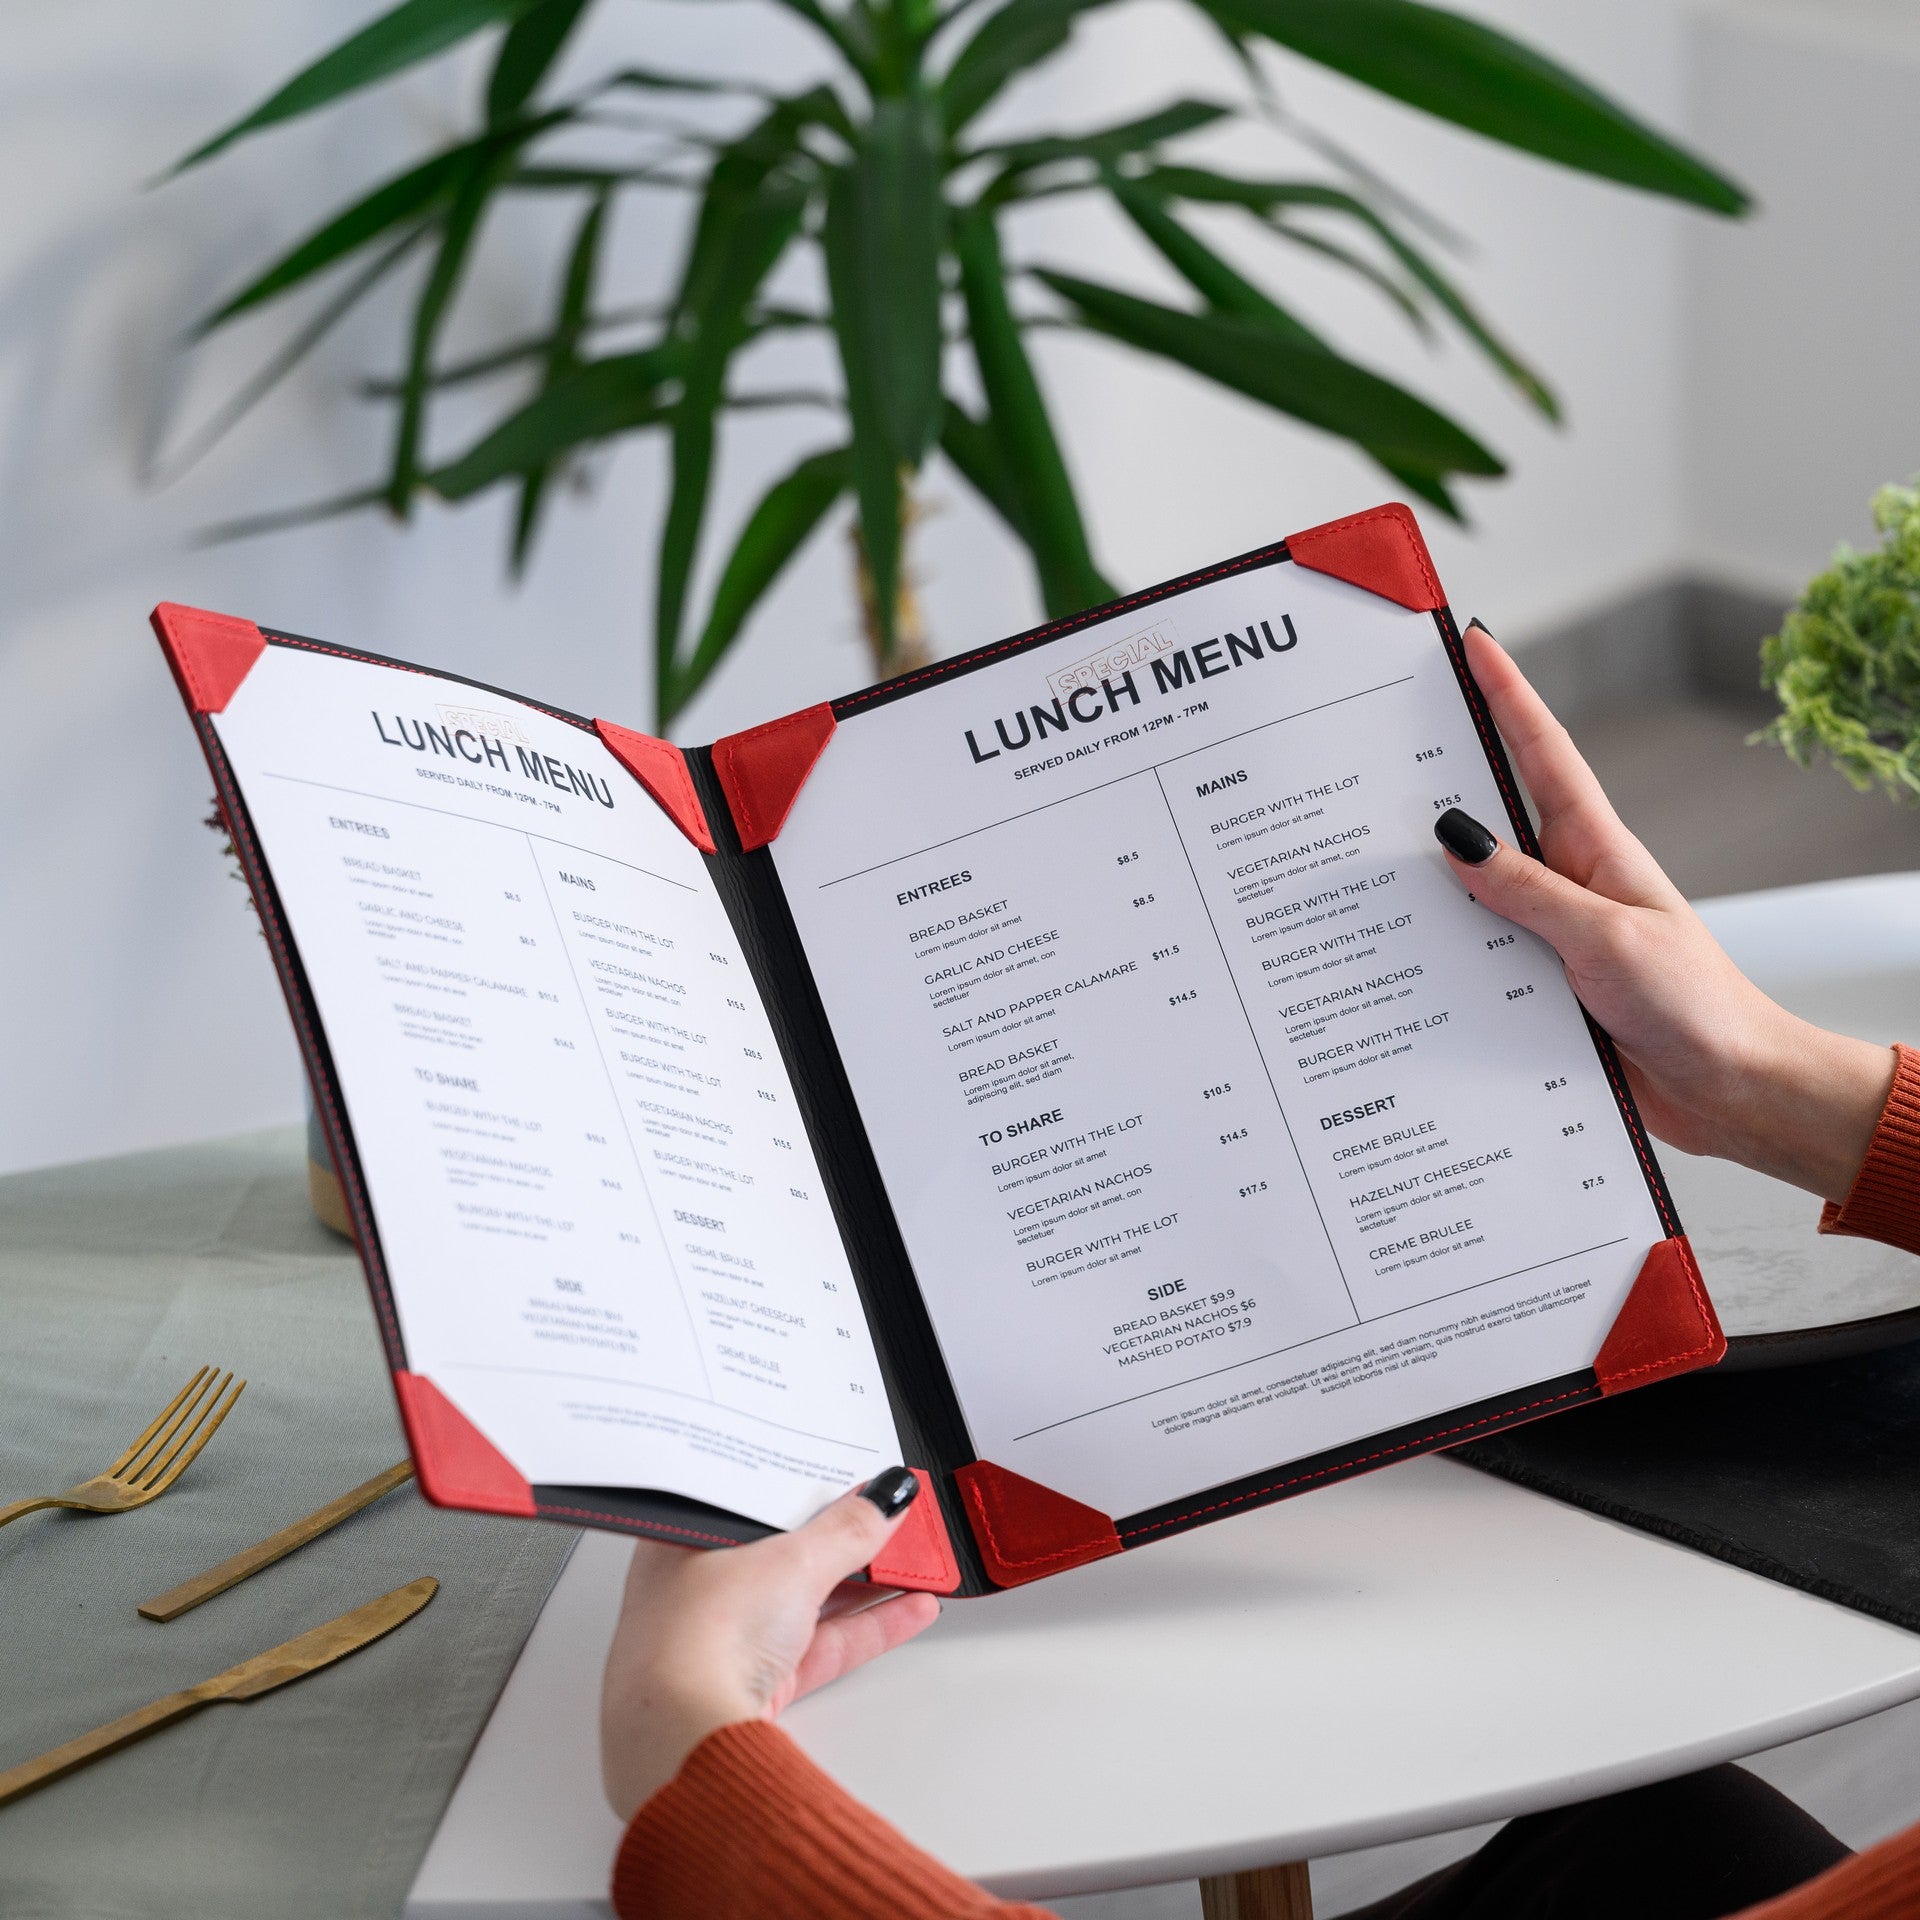 Chic Leather Menu Clipboard, offering a sleek and stylish presentation for your menu items.